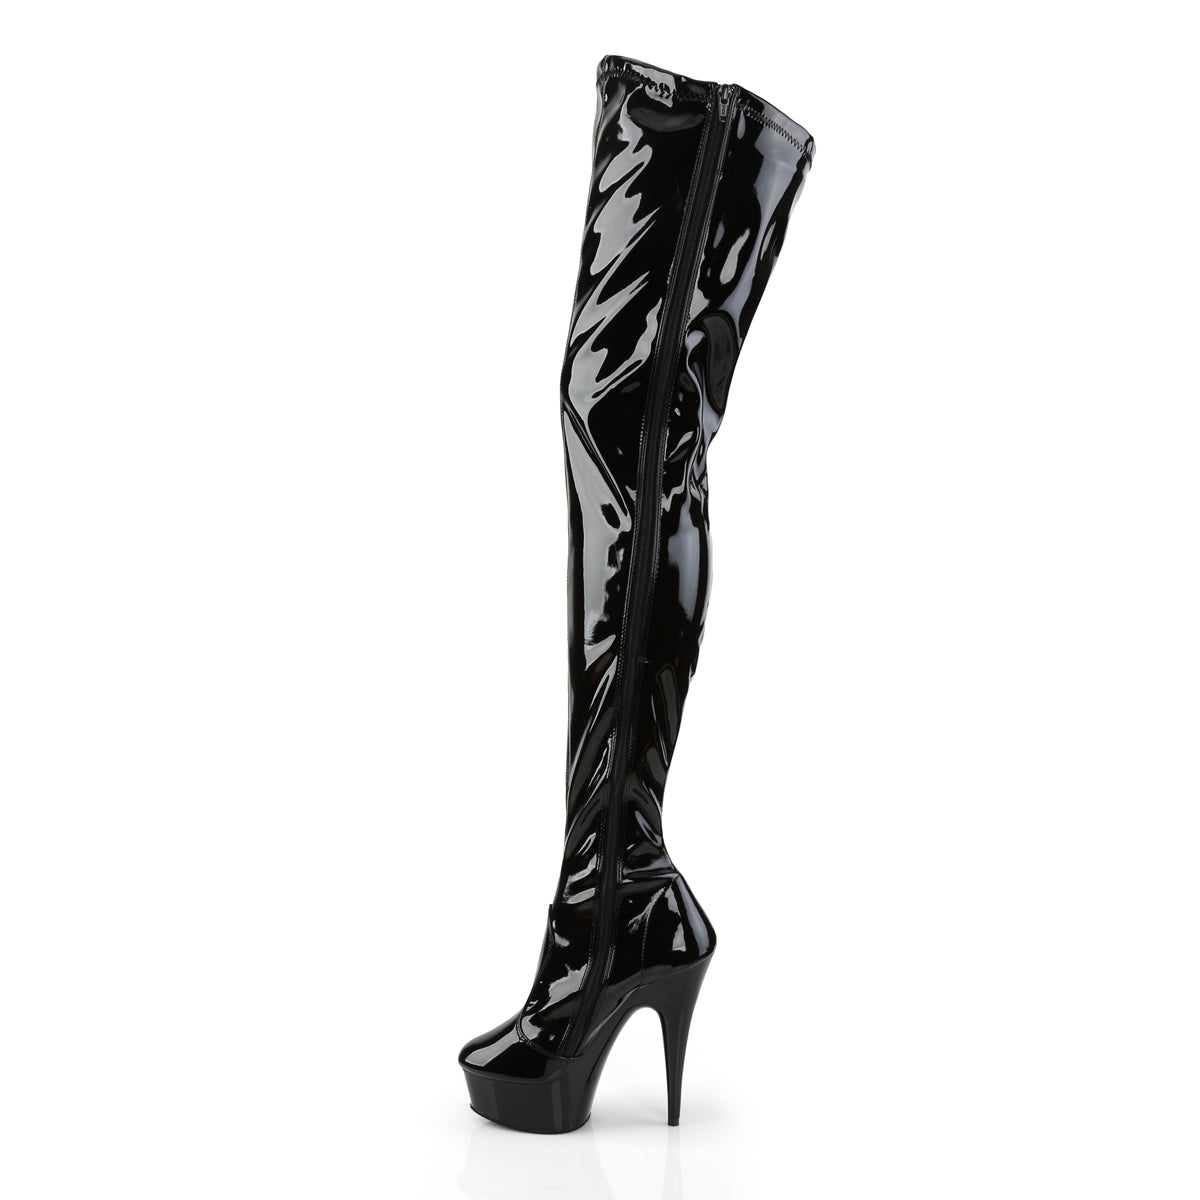 DELIGHT-4000 Black Thigh High Boots Black Multi view 4